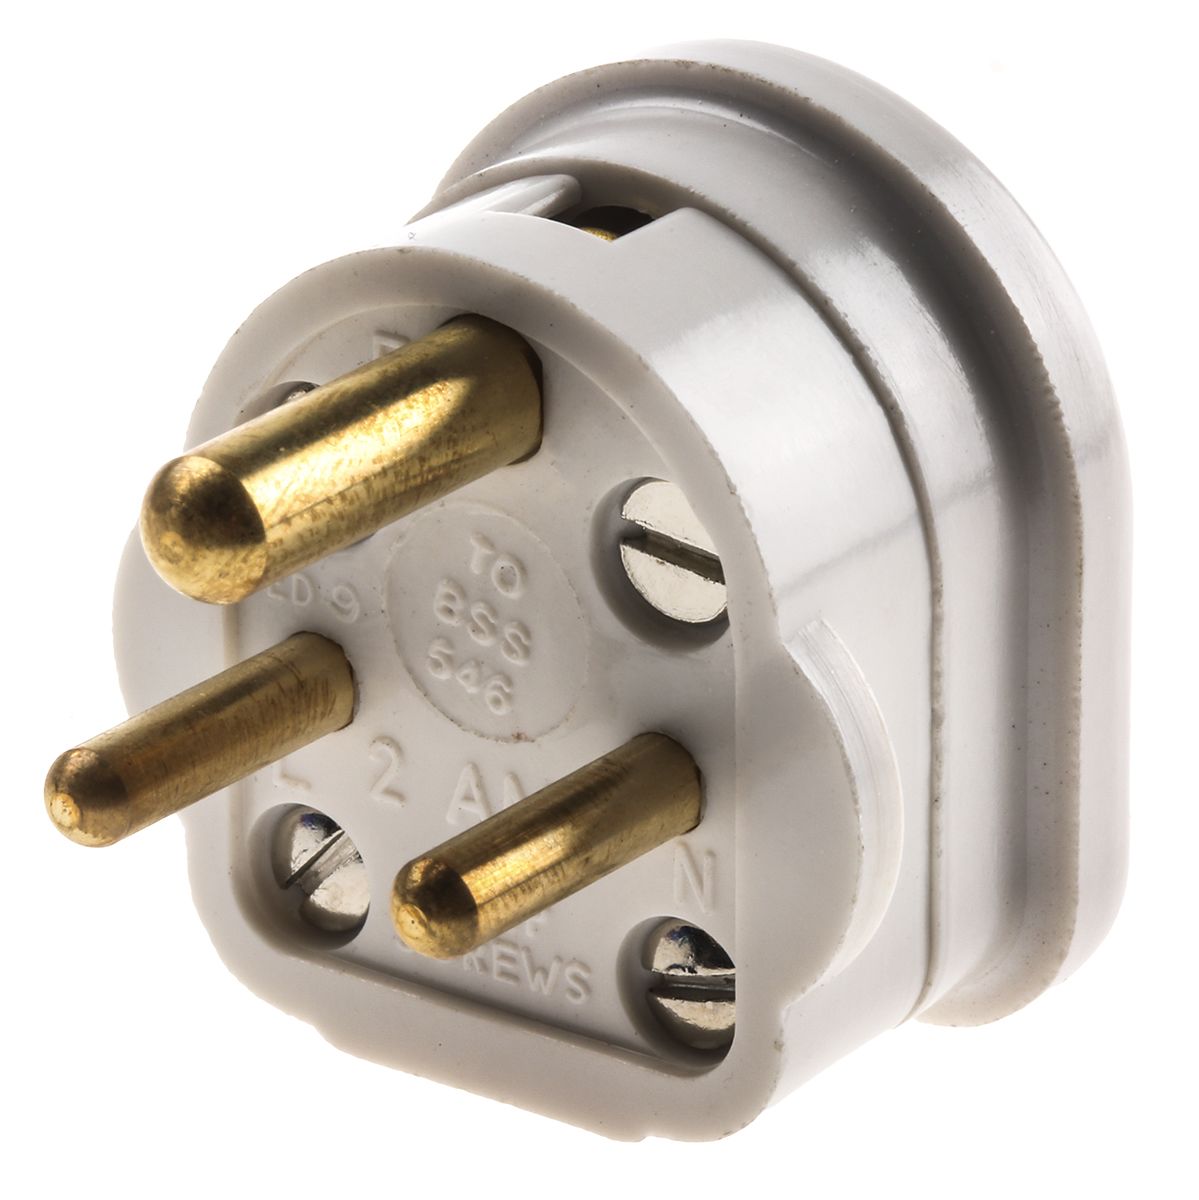 MK Electric UK Mains Plug, 2A, Cable Mount